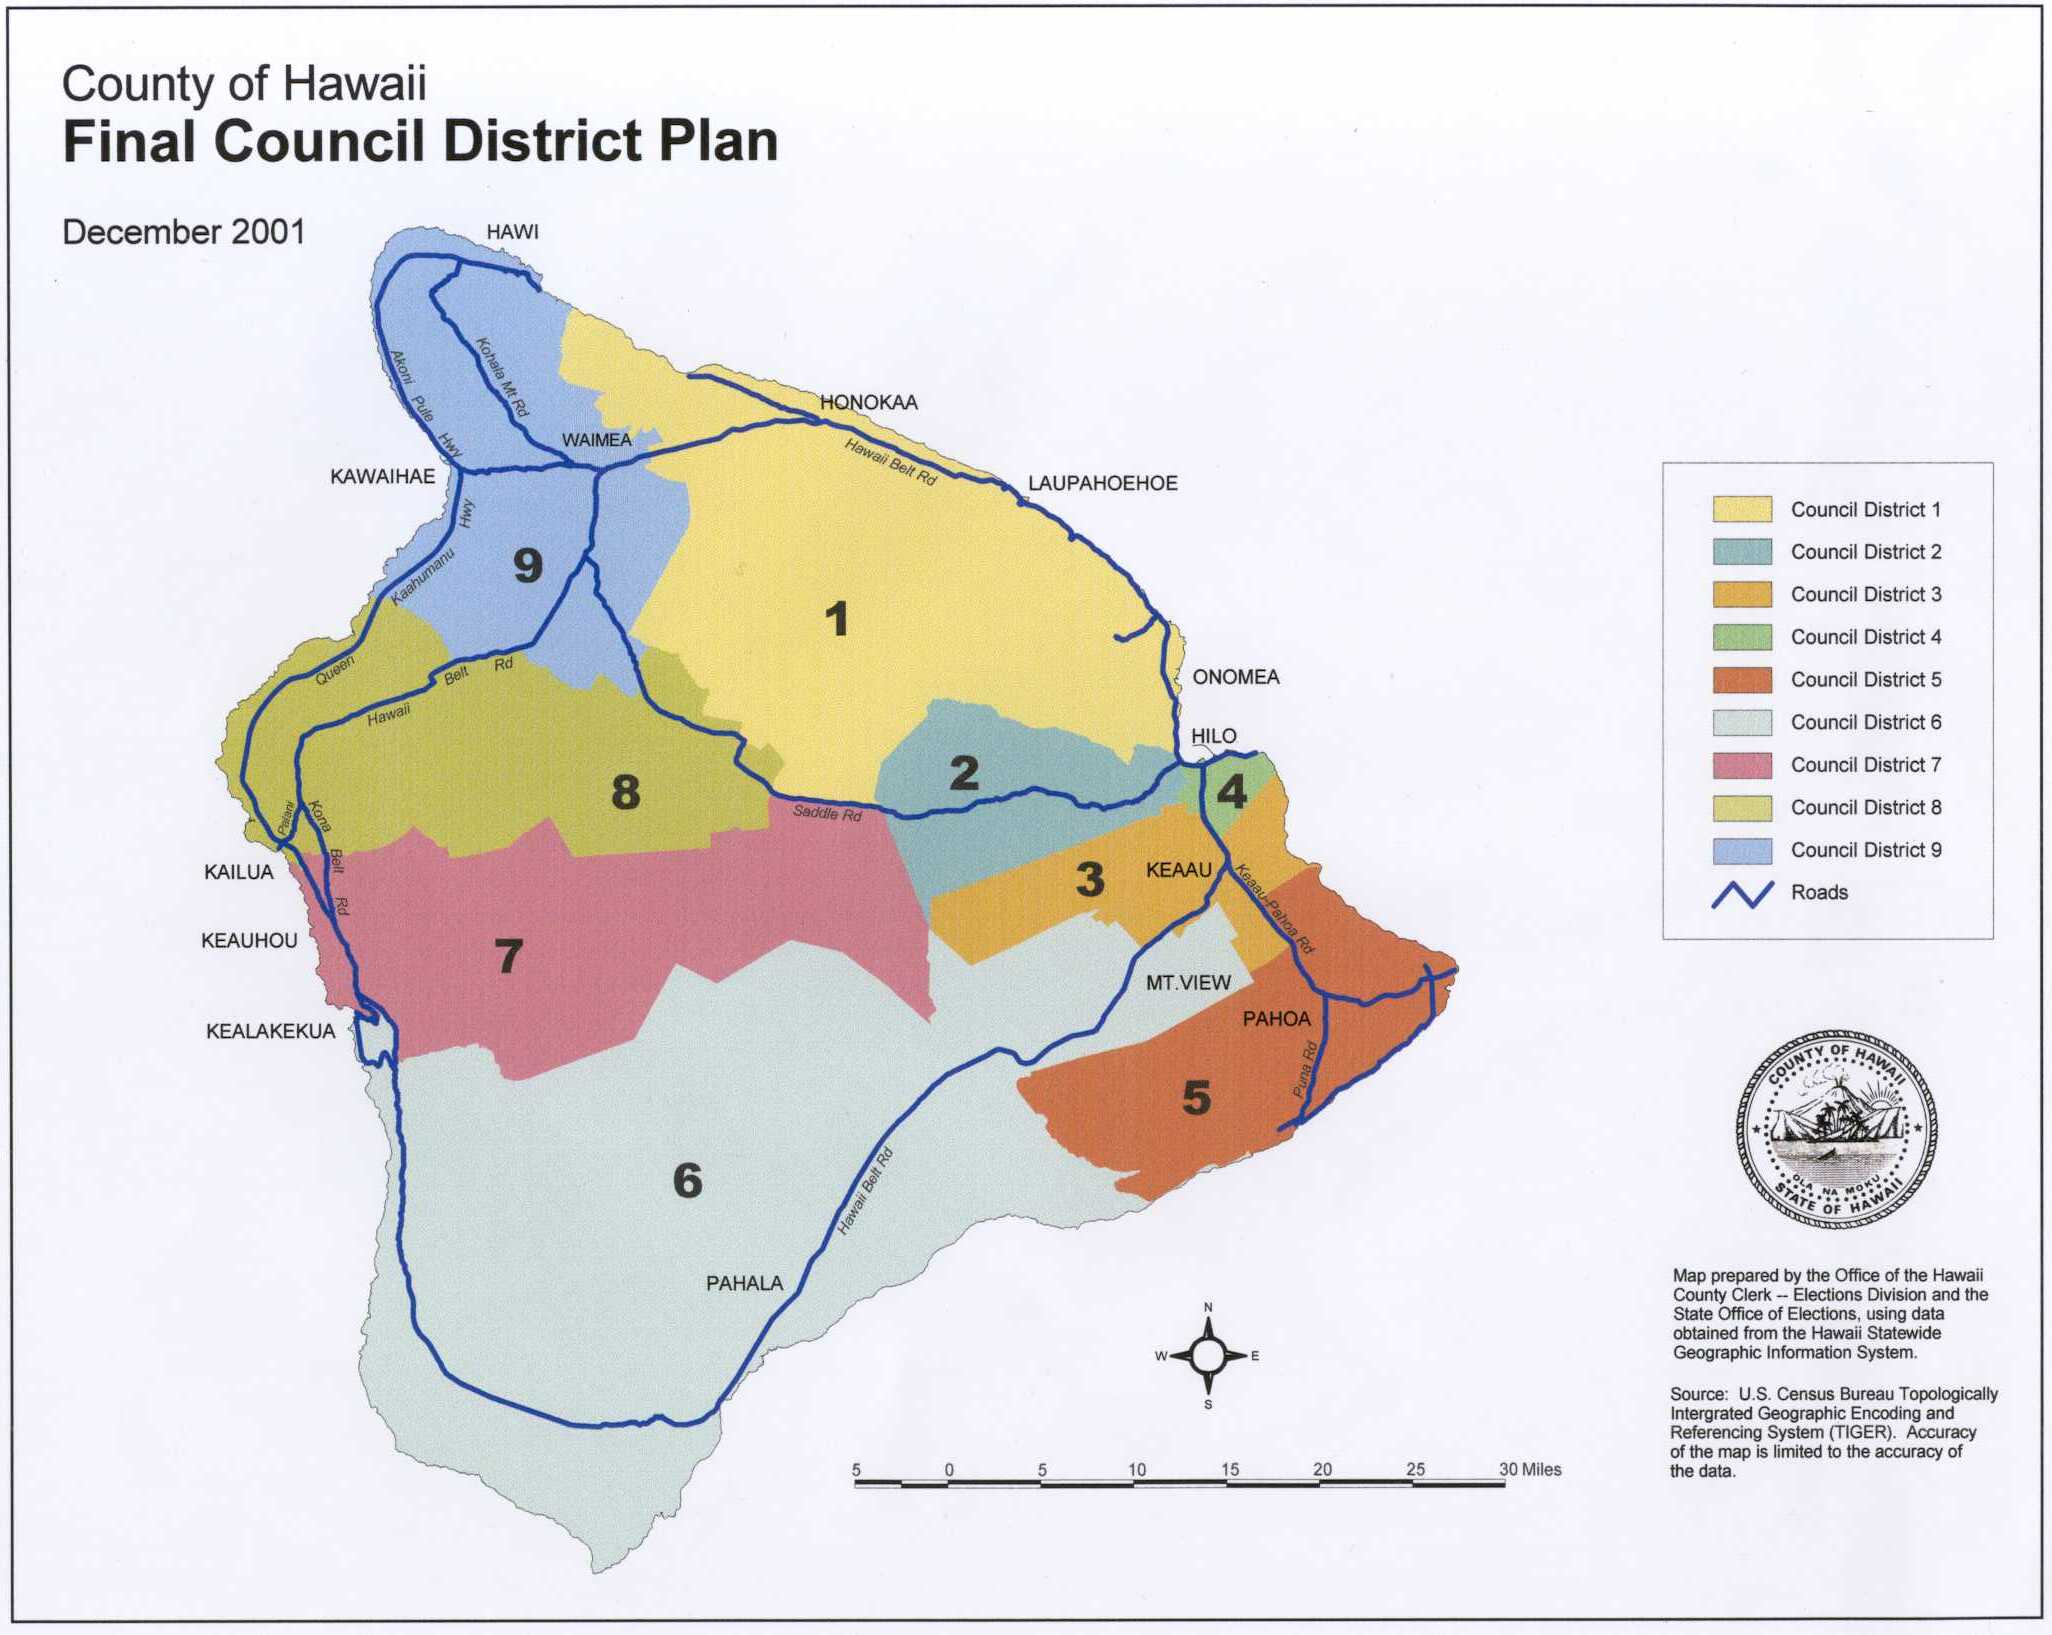 VIDEO: Hawaii County redistricting controversy begins